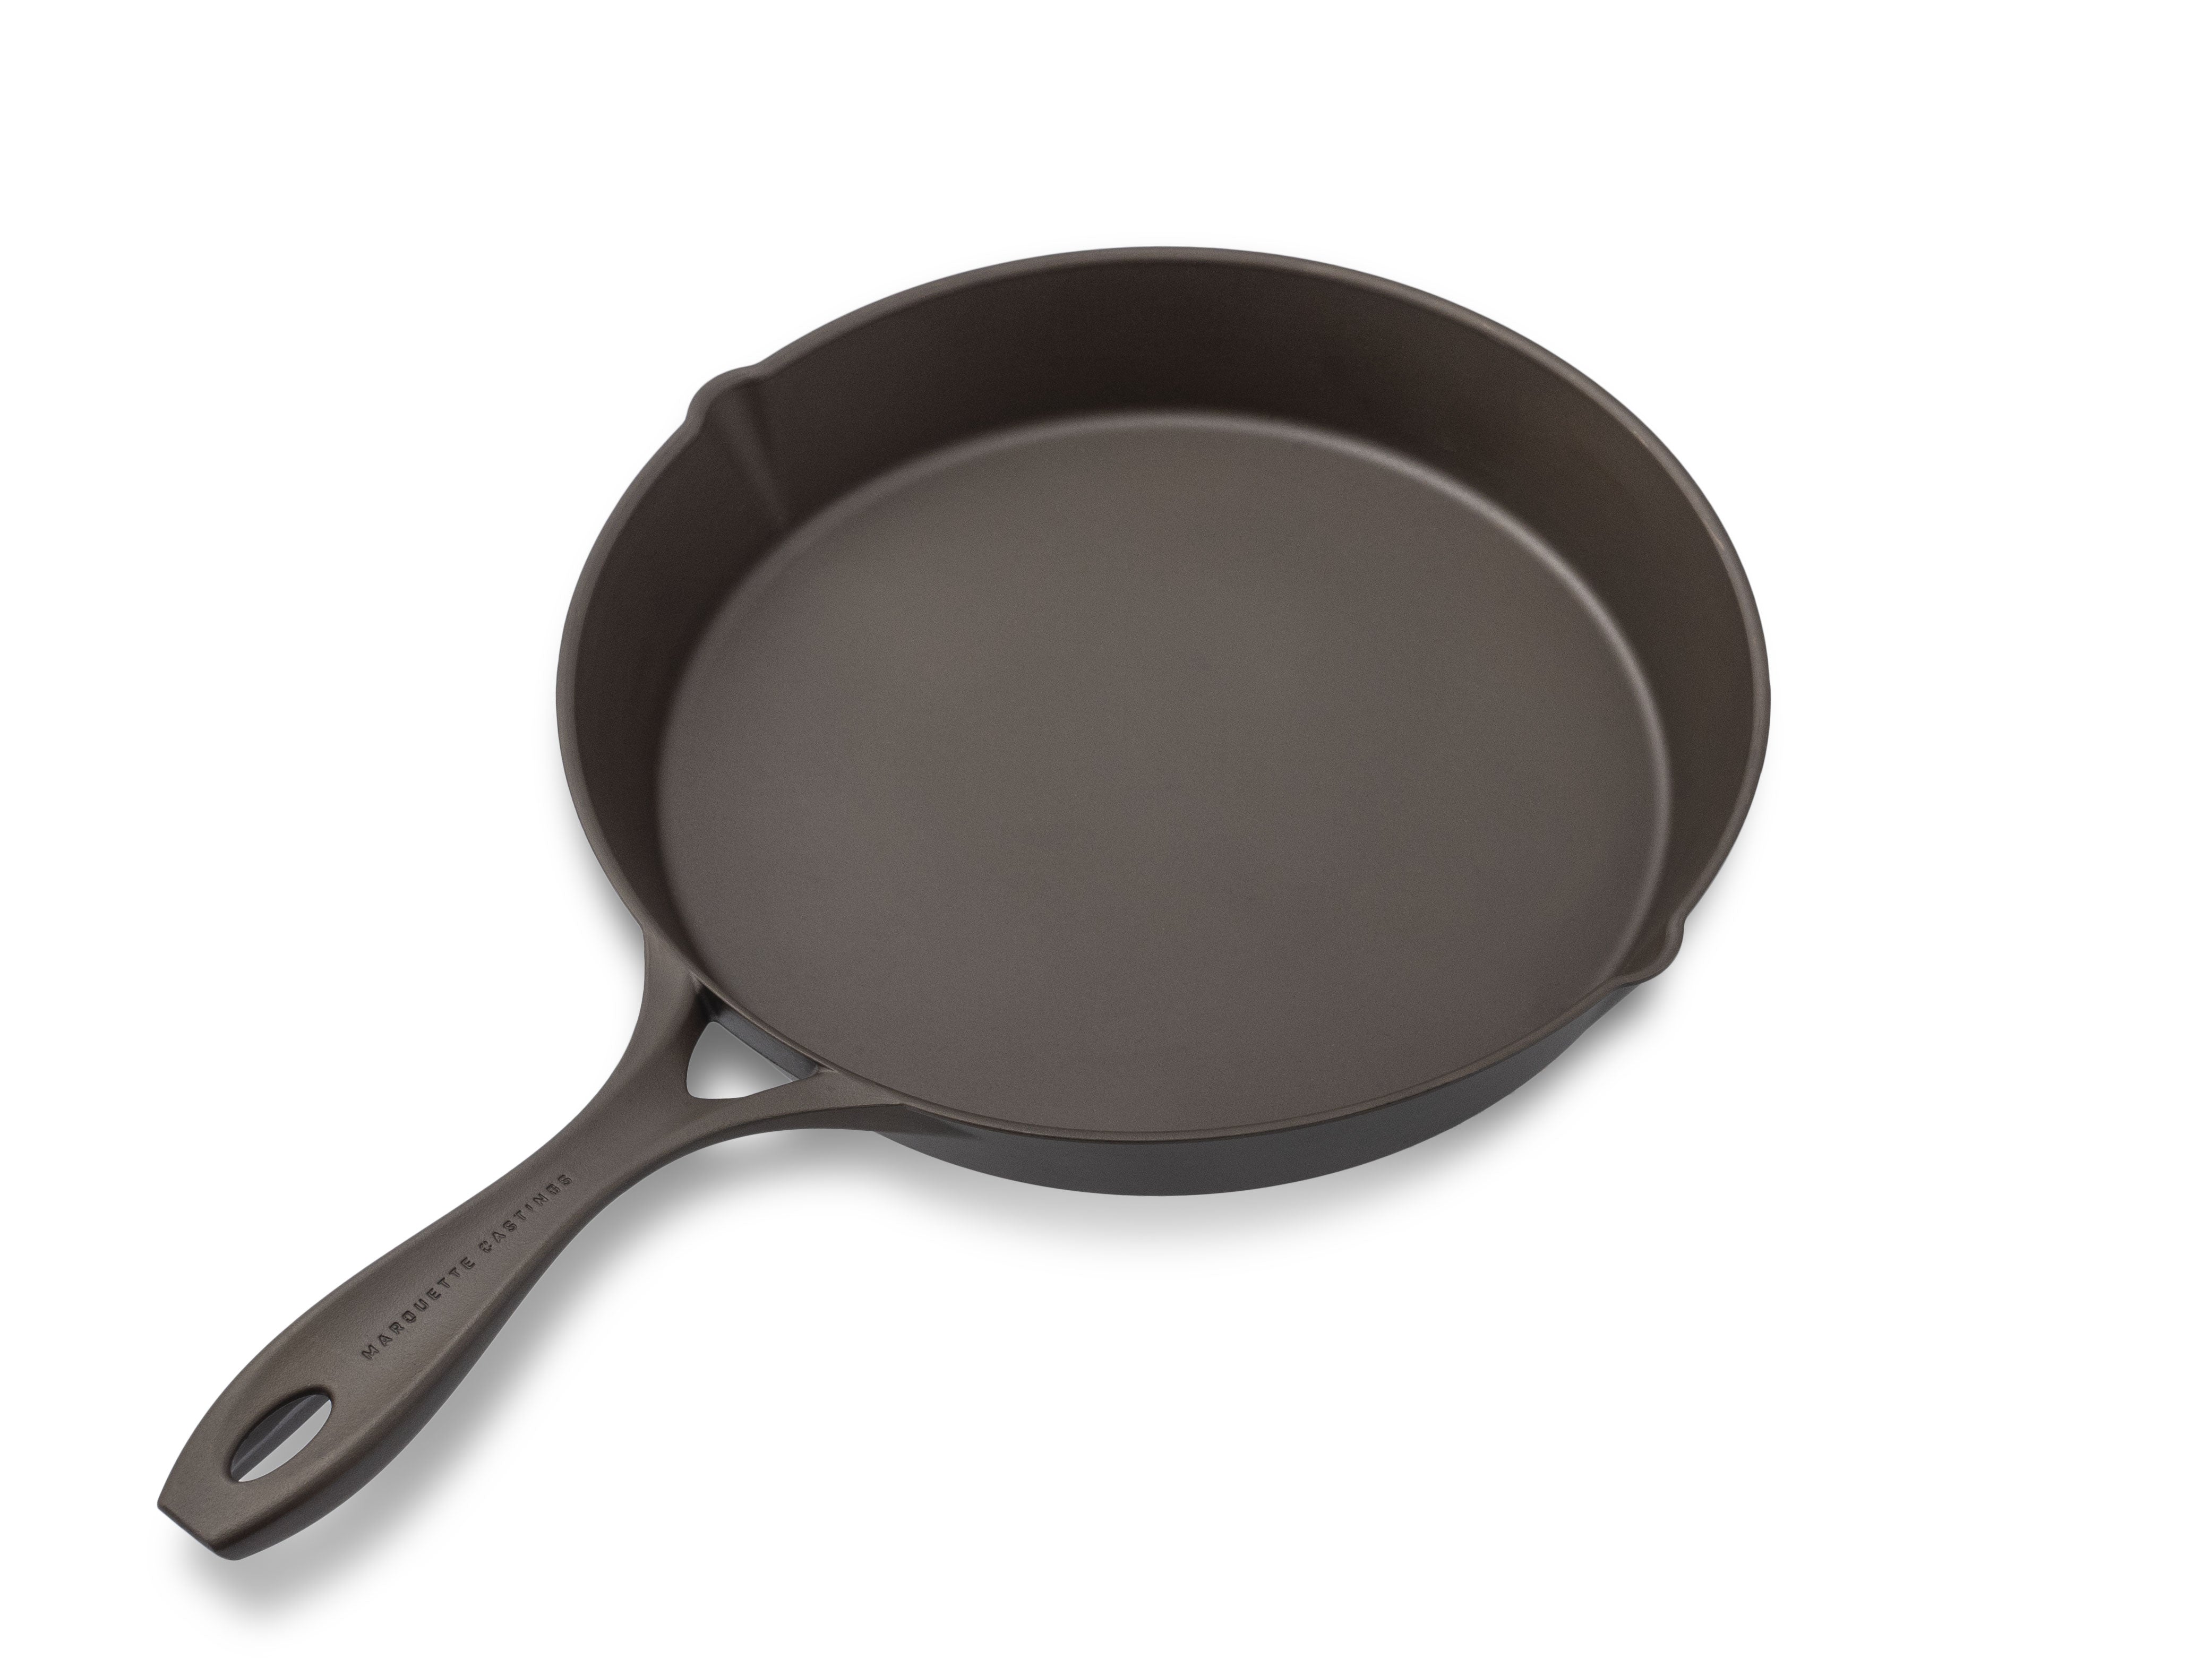 I Can't Get Enough of These Lightweight Cast-Iron Skillets